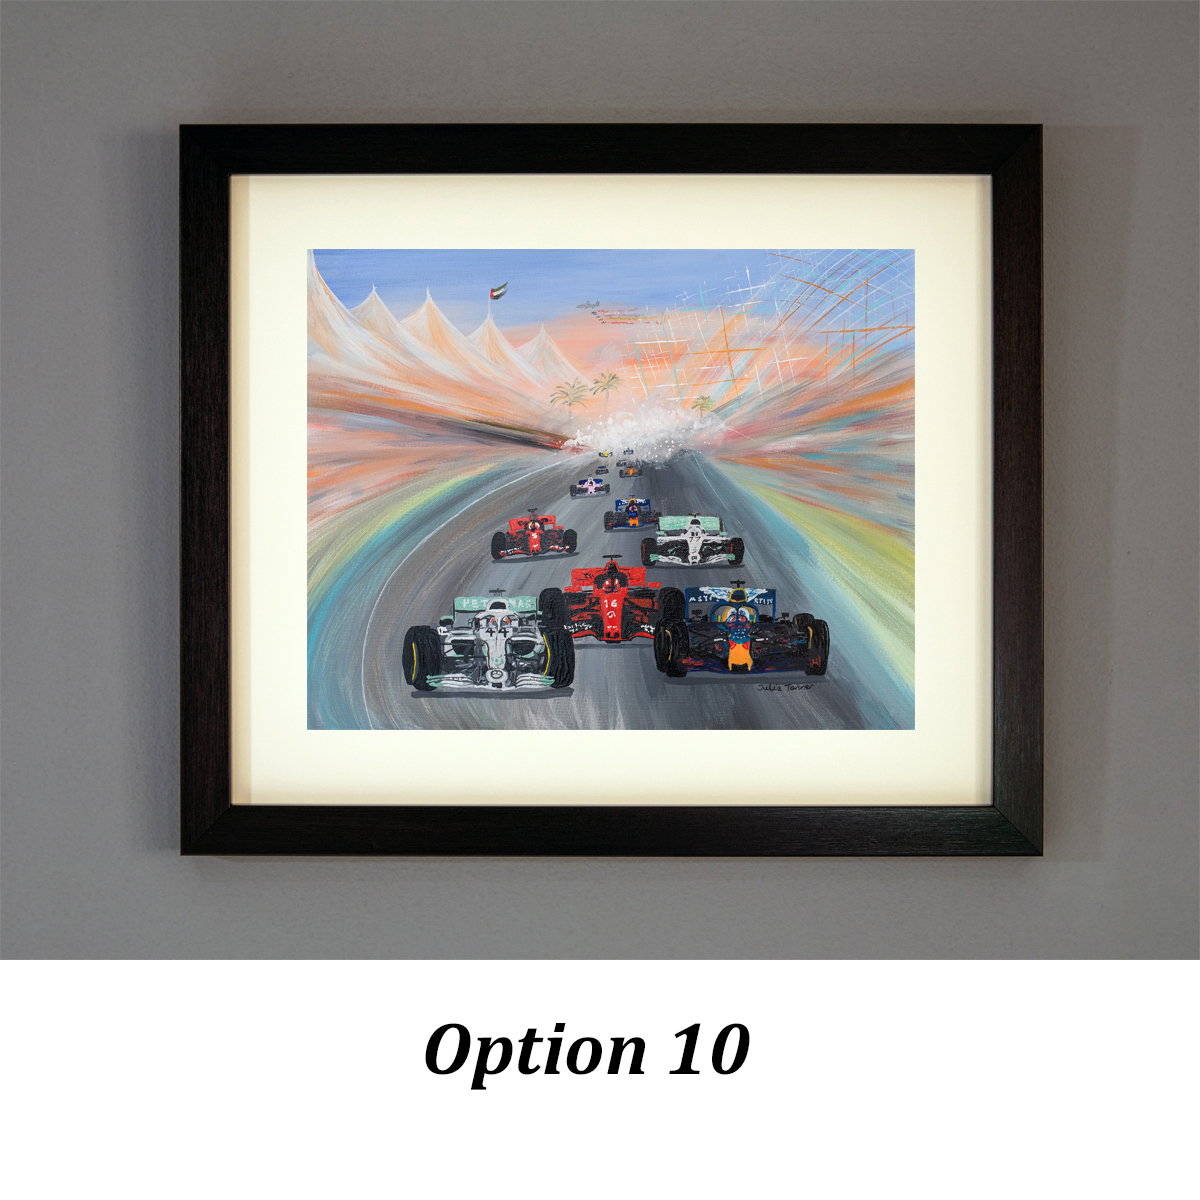 framed formula one wall art of the Abu Dhabi grand prix based on an original painting by Isle of Wight artist Julia Tanner